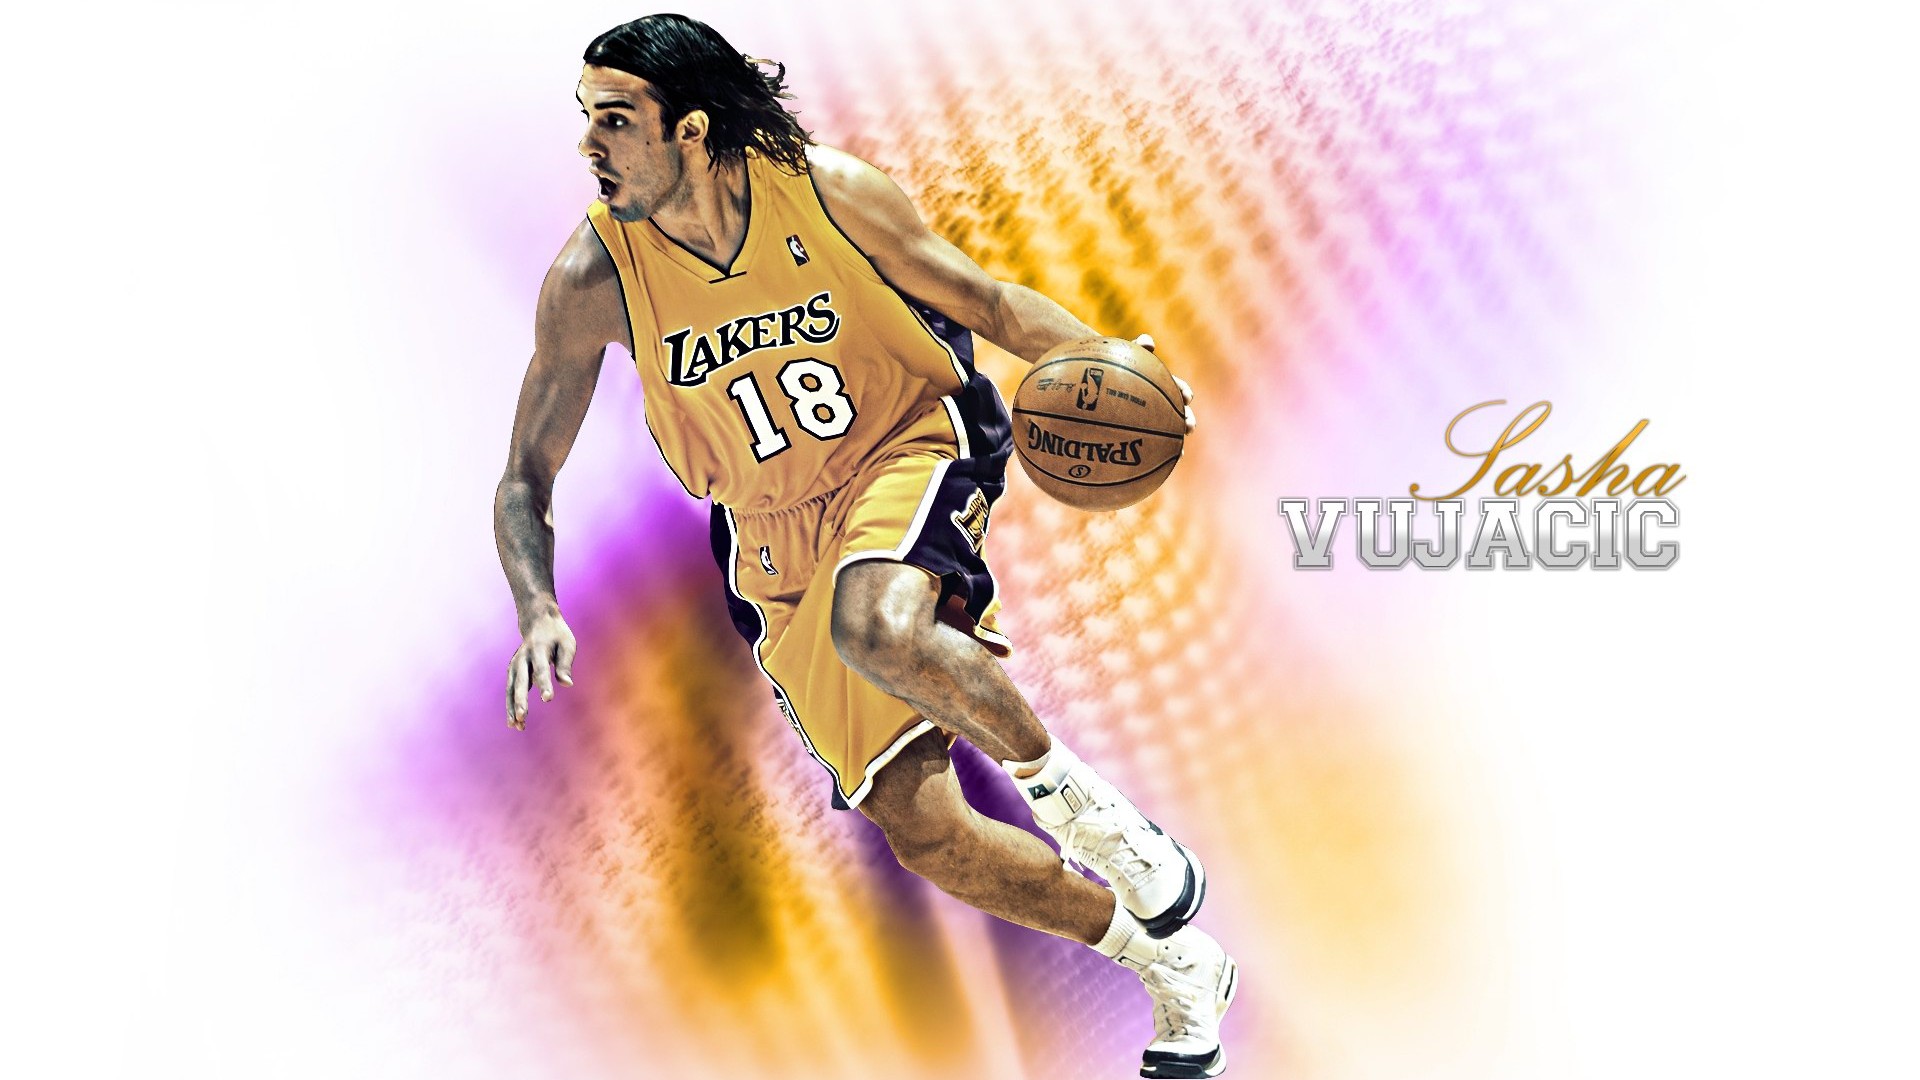 Los Angeles Lakers Wallpaper Oficial #23 - 1920x1080